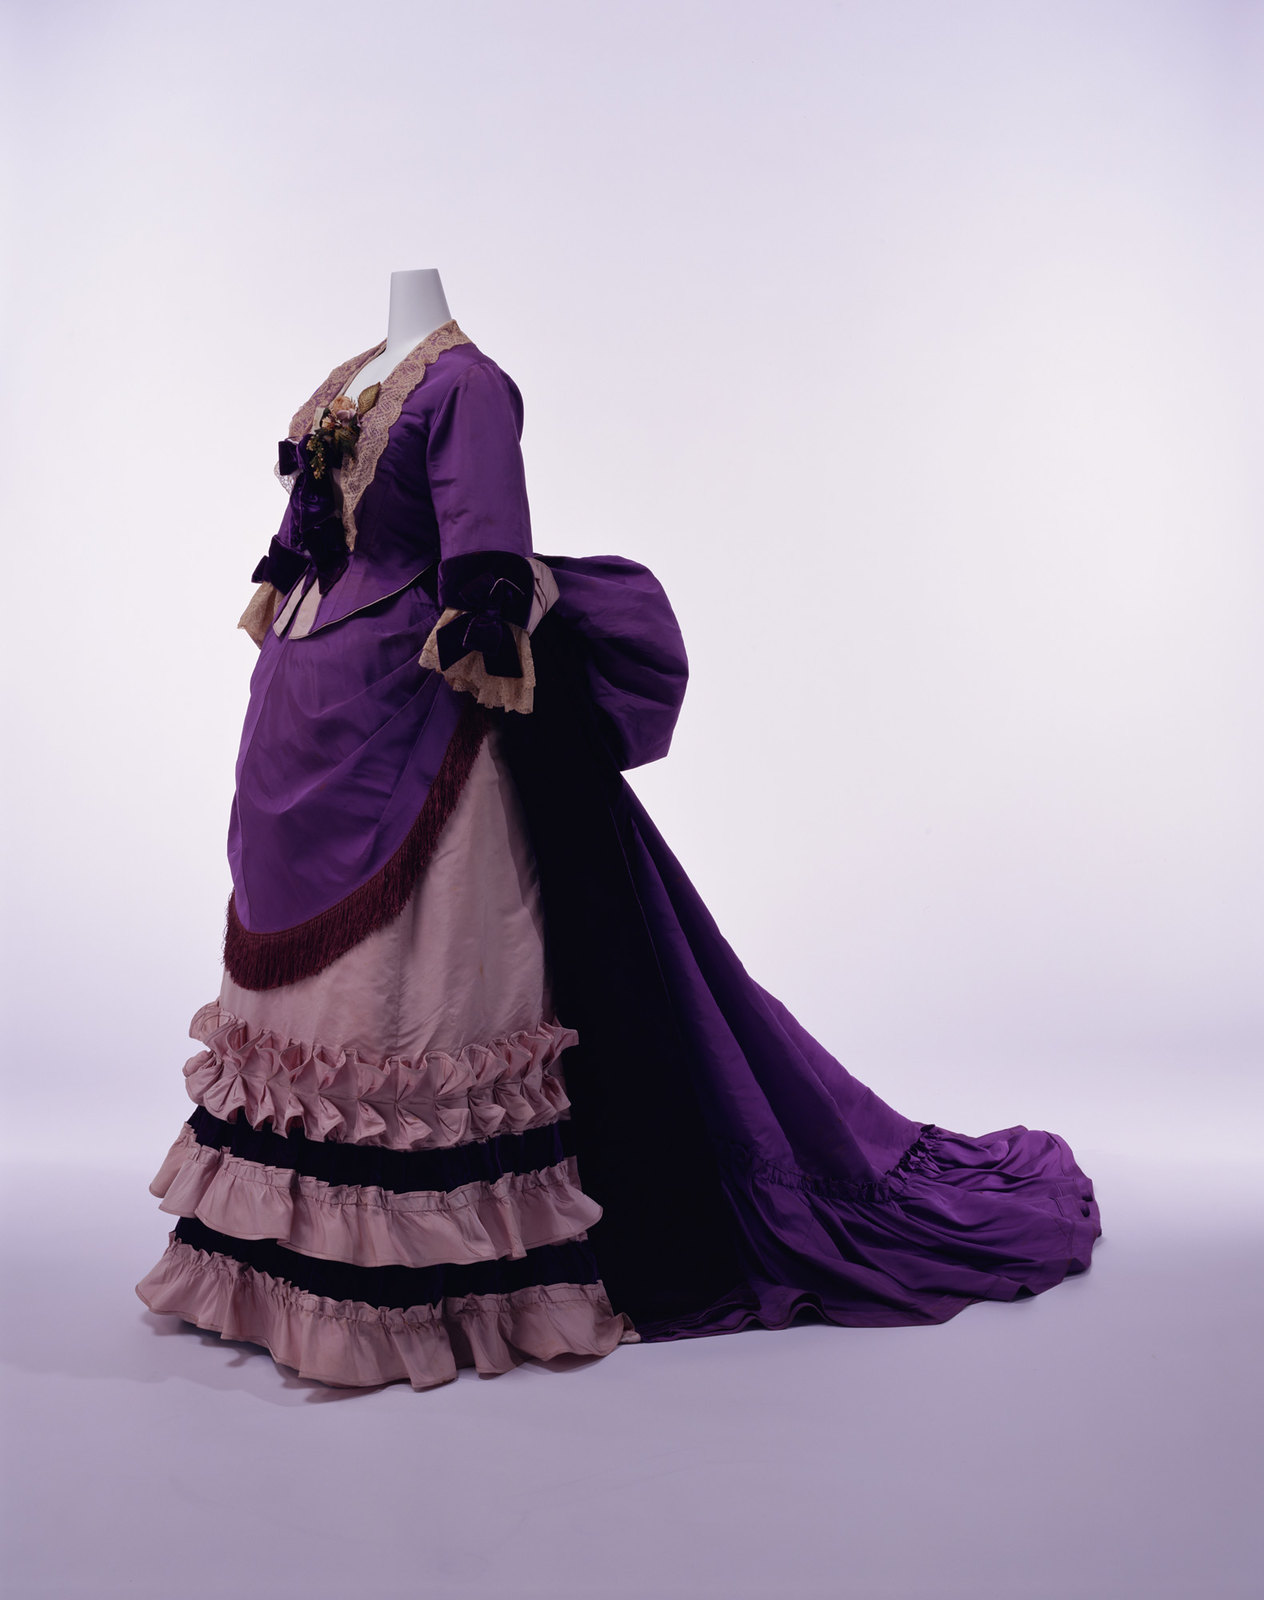 1894. Afternoon Dress. Silk faille set of bodice and skirt; silk lace and velvet bows at neck and cuffs; apron-shaped overskirt with silk fringe at front. Credit KCI